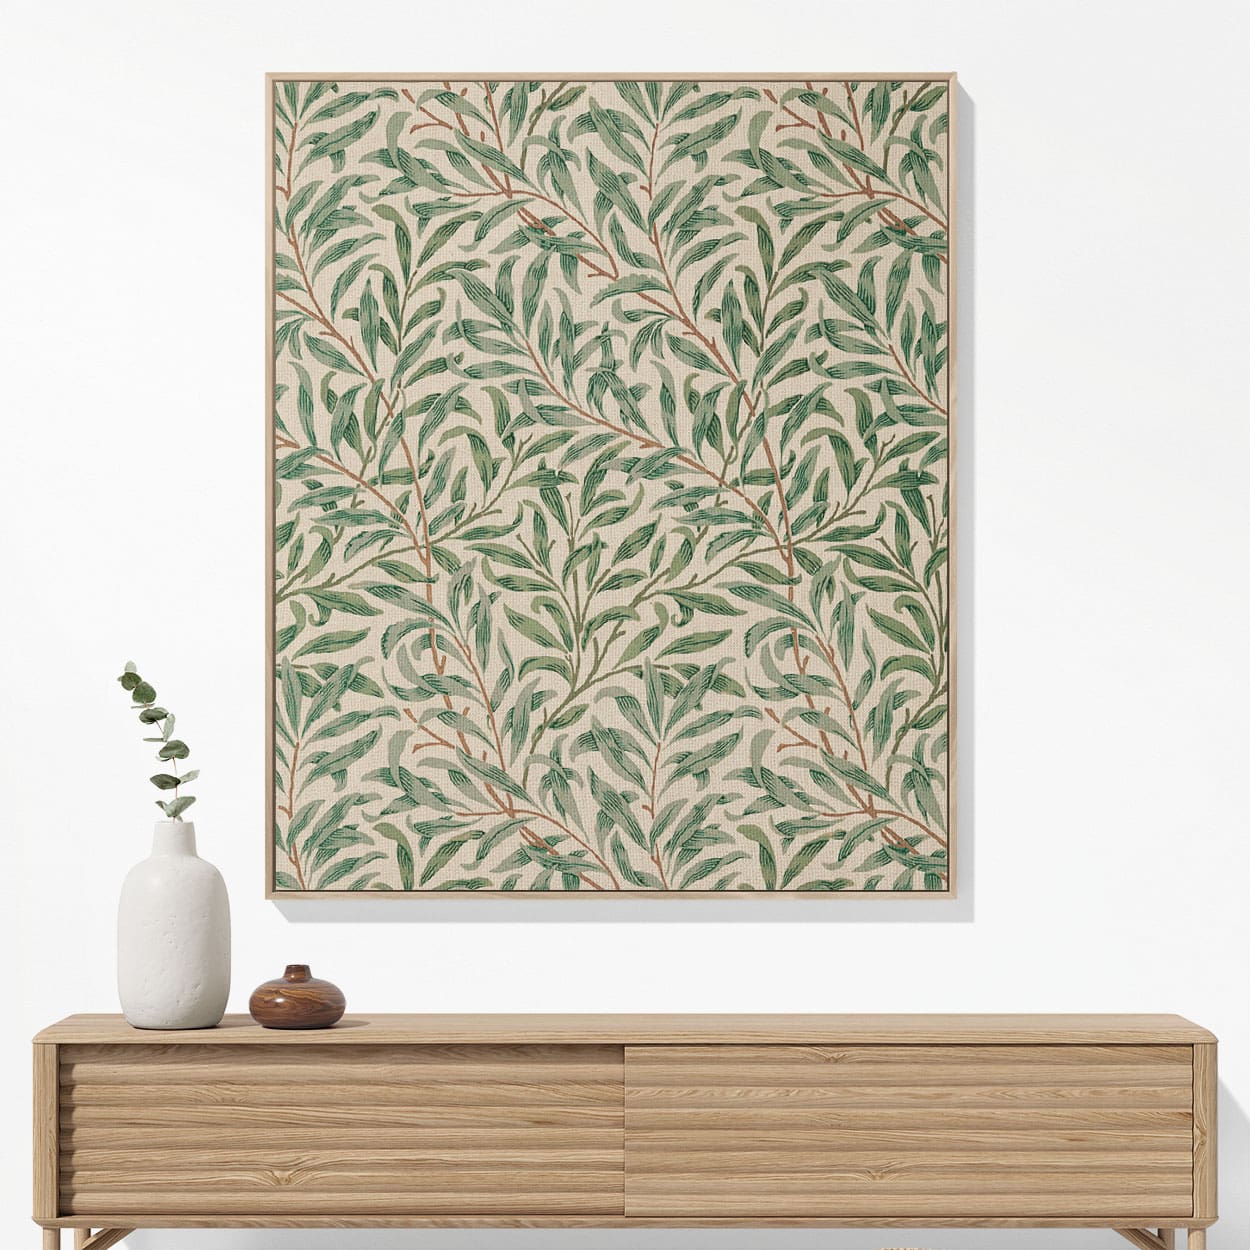 Green Leaf Woven Blanket Woven Blanket Hanging on a Wall as Framed Wall Art